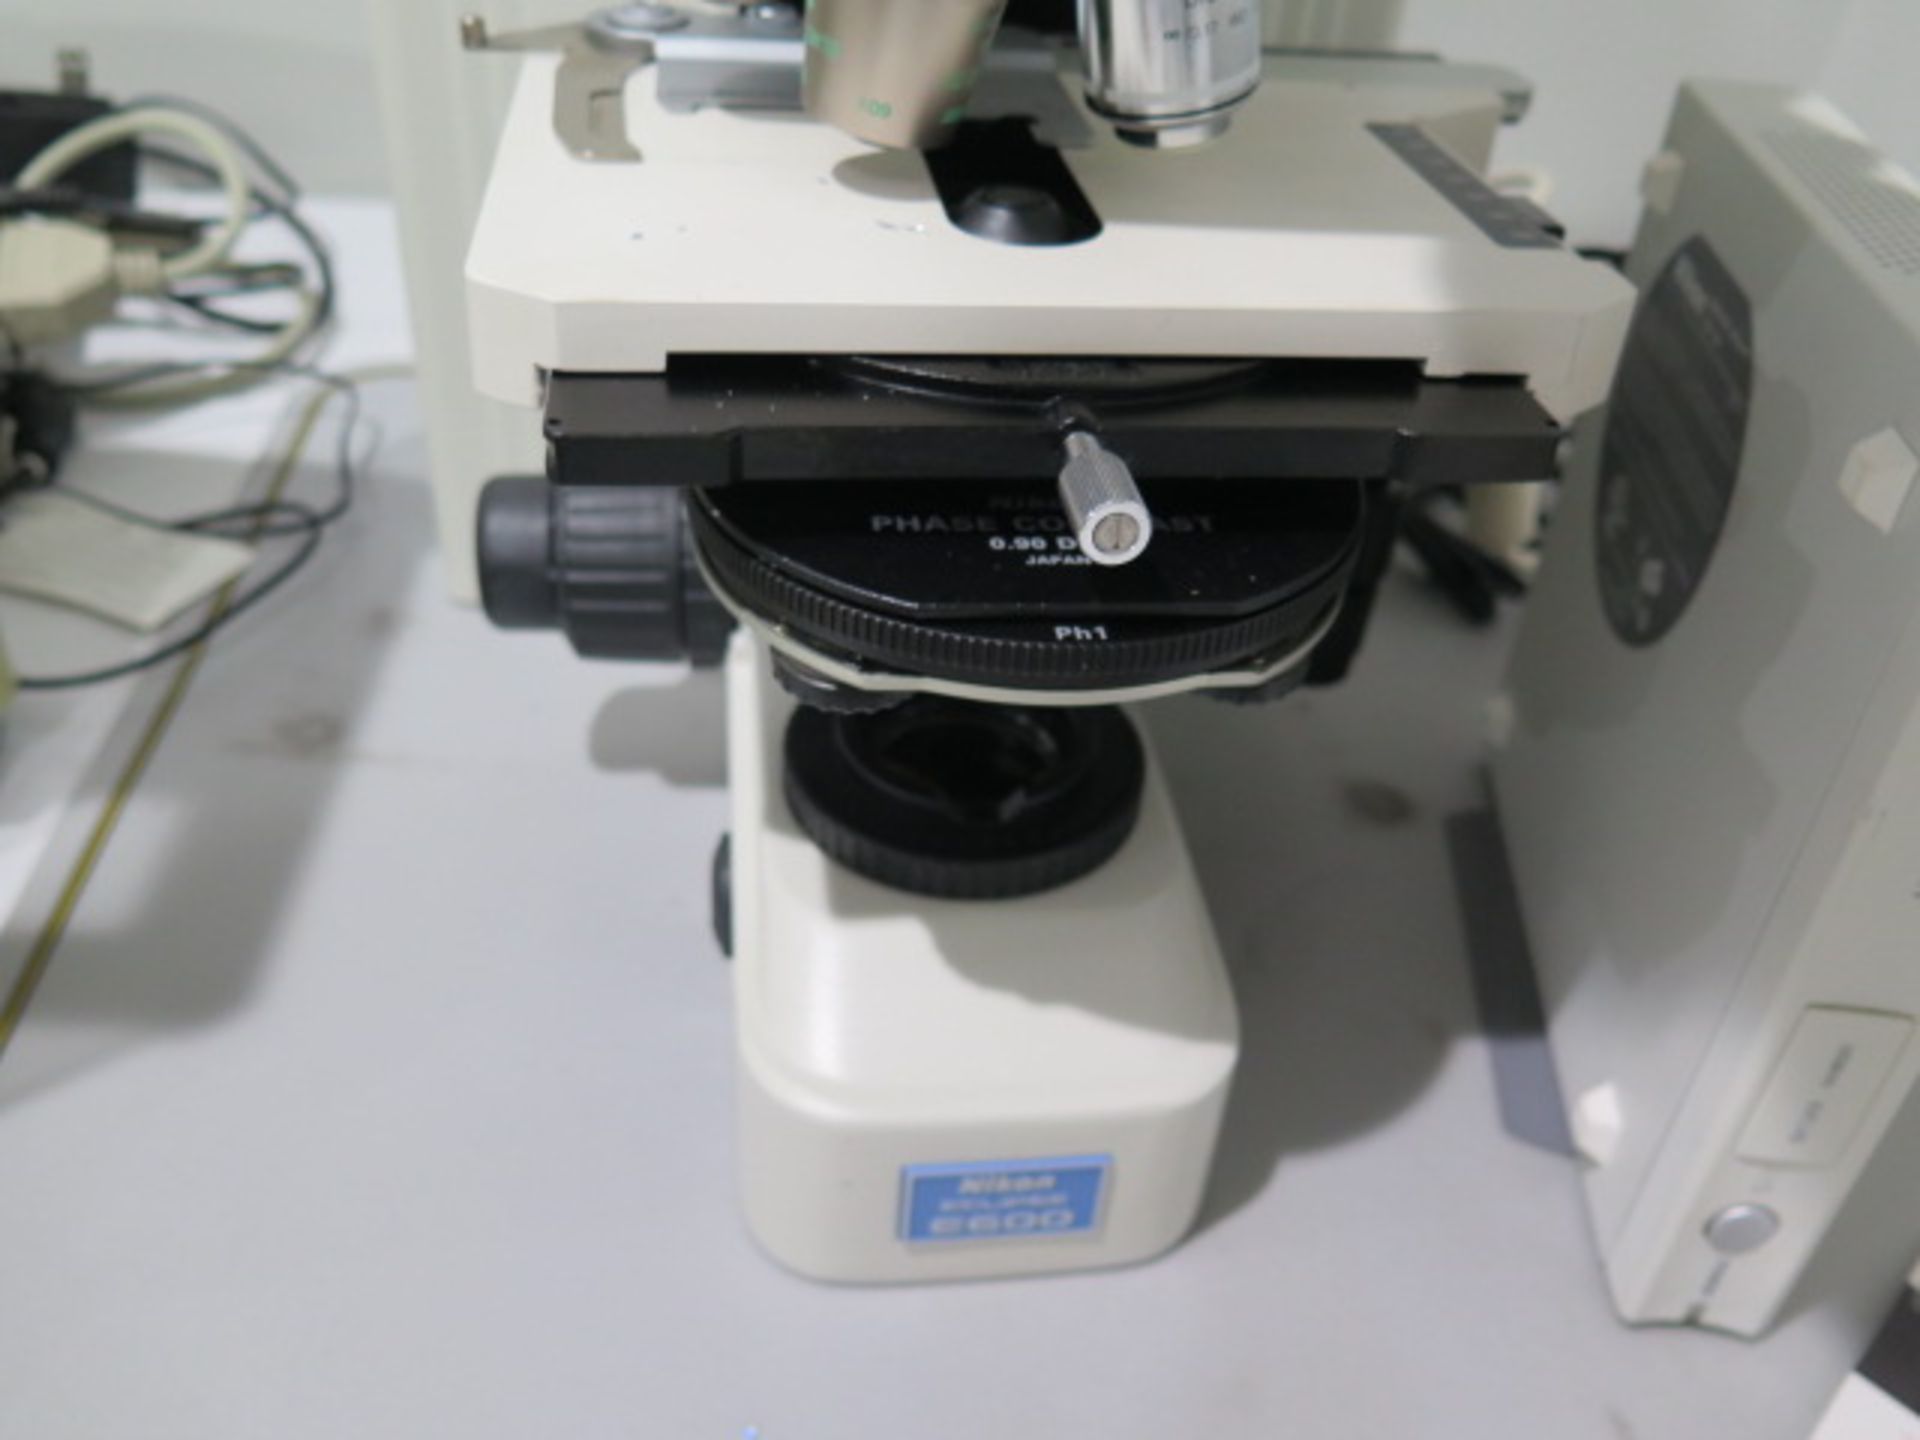 Nikon Eclipse E600 Research Microscope s/n 763673 w/ Nikon Light,DS-U2 Digital Sight Unit,SOLD AS IS - Image 6 of 15